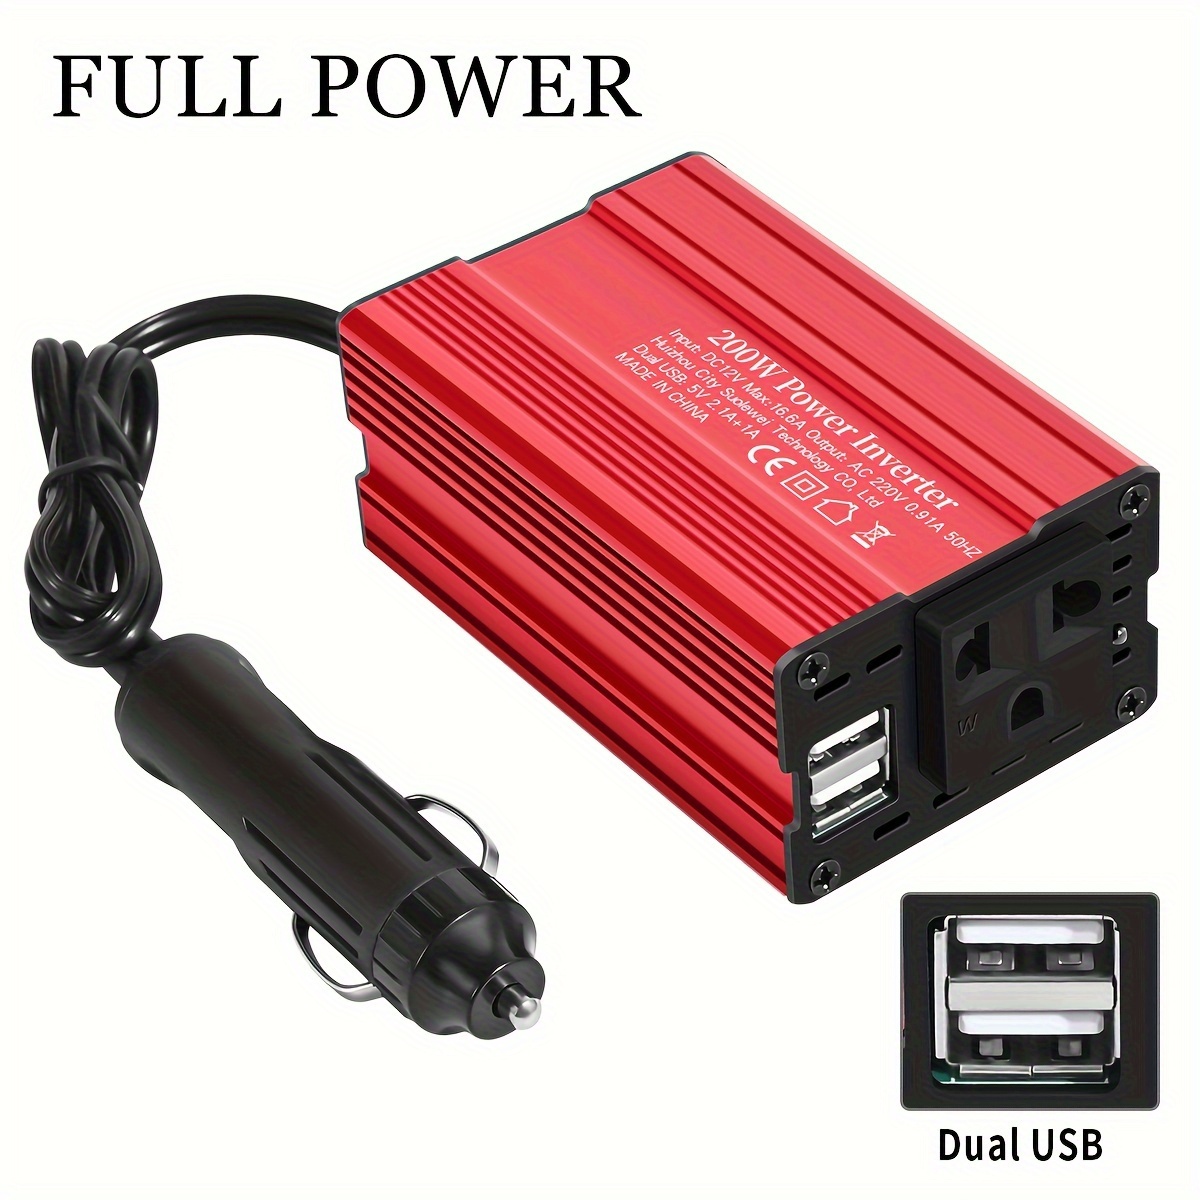 

200w Full Power Dc12v To Ac 220v Car Power Inverter Converter Vehicle Adapter Plug Outlet With 3.1a Dual Usb For Laptop Computer Eu Socket